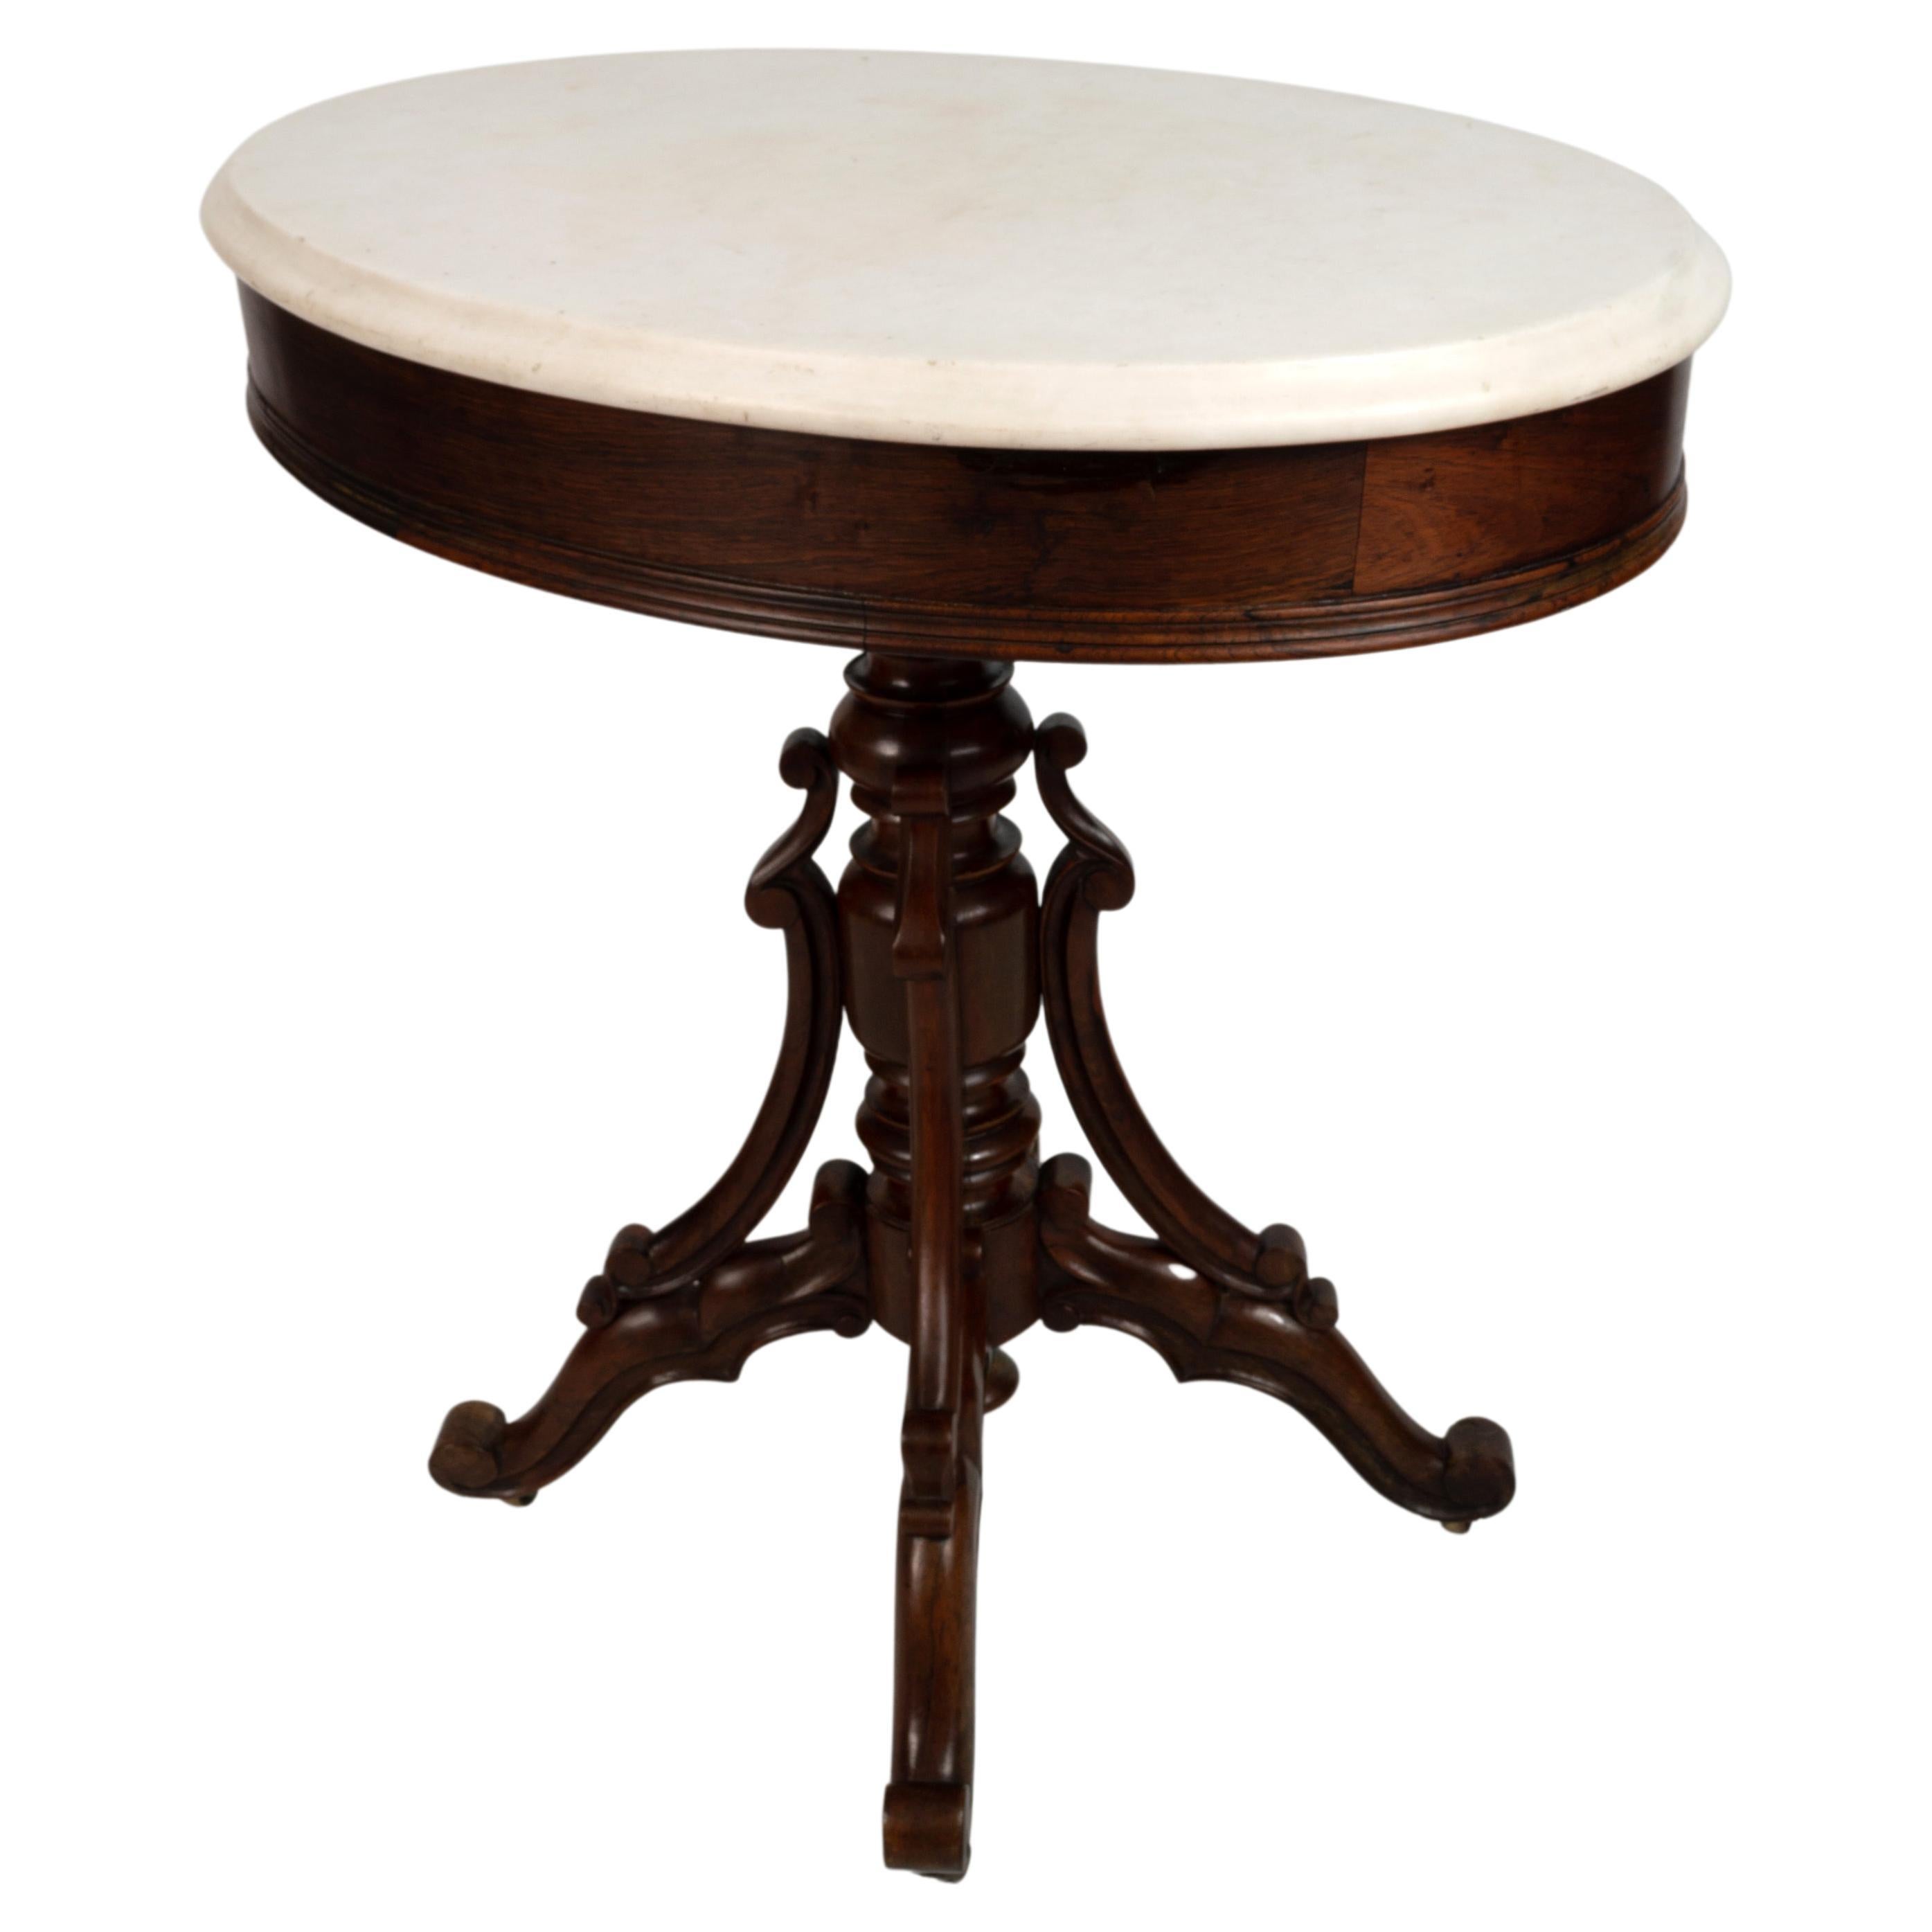 Antique French 19th Century Rosewood and Marble Oval Occasional Table C1850 For Sale